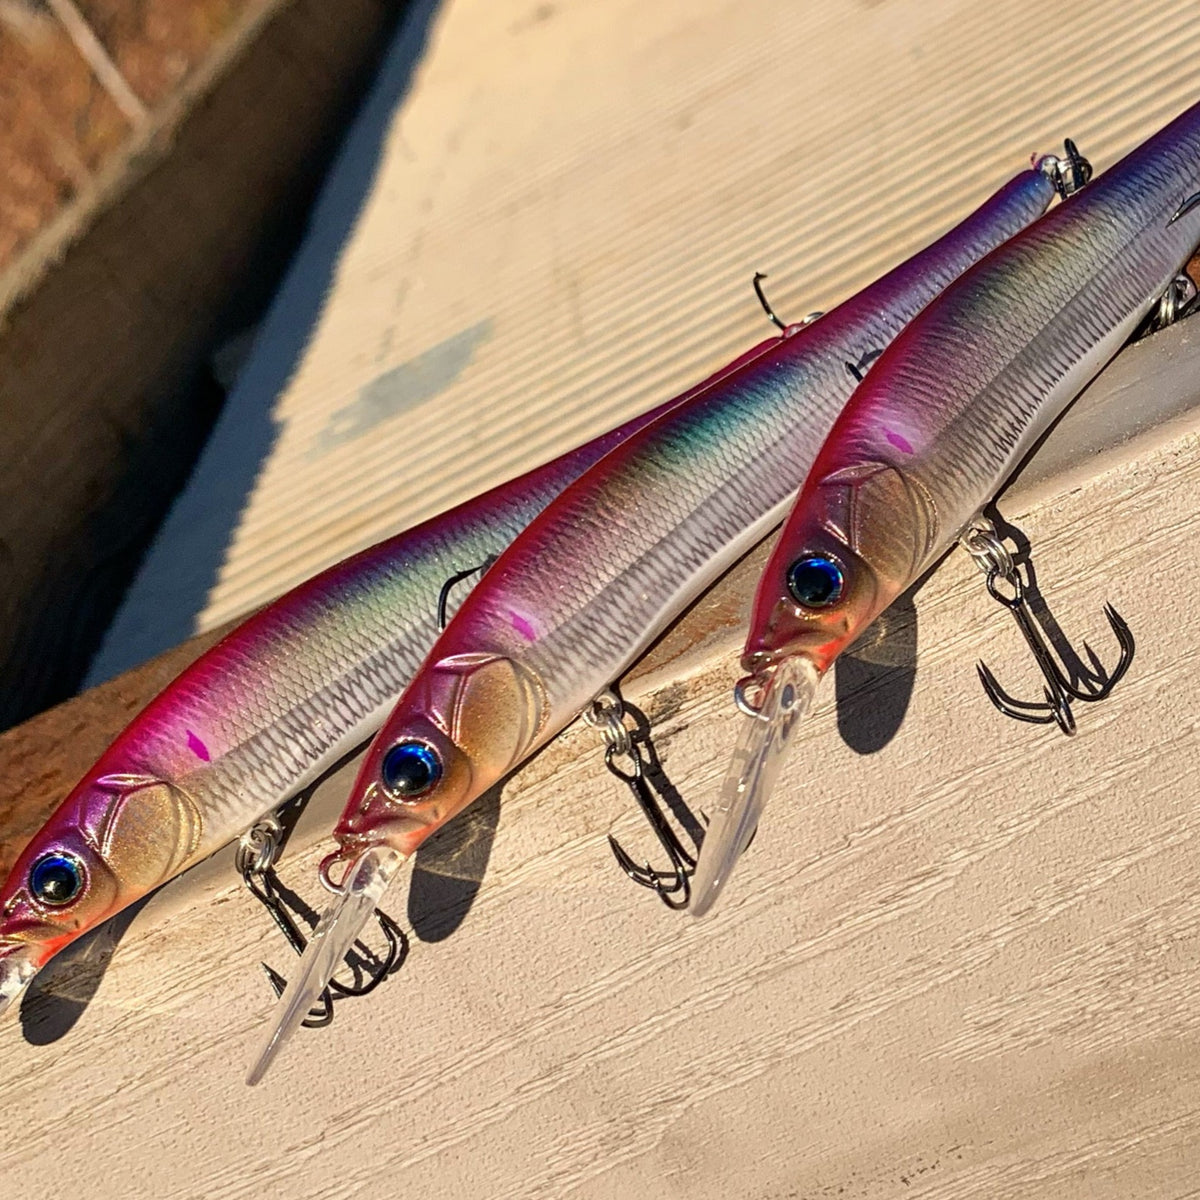 ** NEW ** LIMITED MEGABASS VISION 110+1  -  ‘PINK THREADFIN’